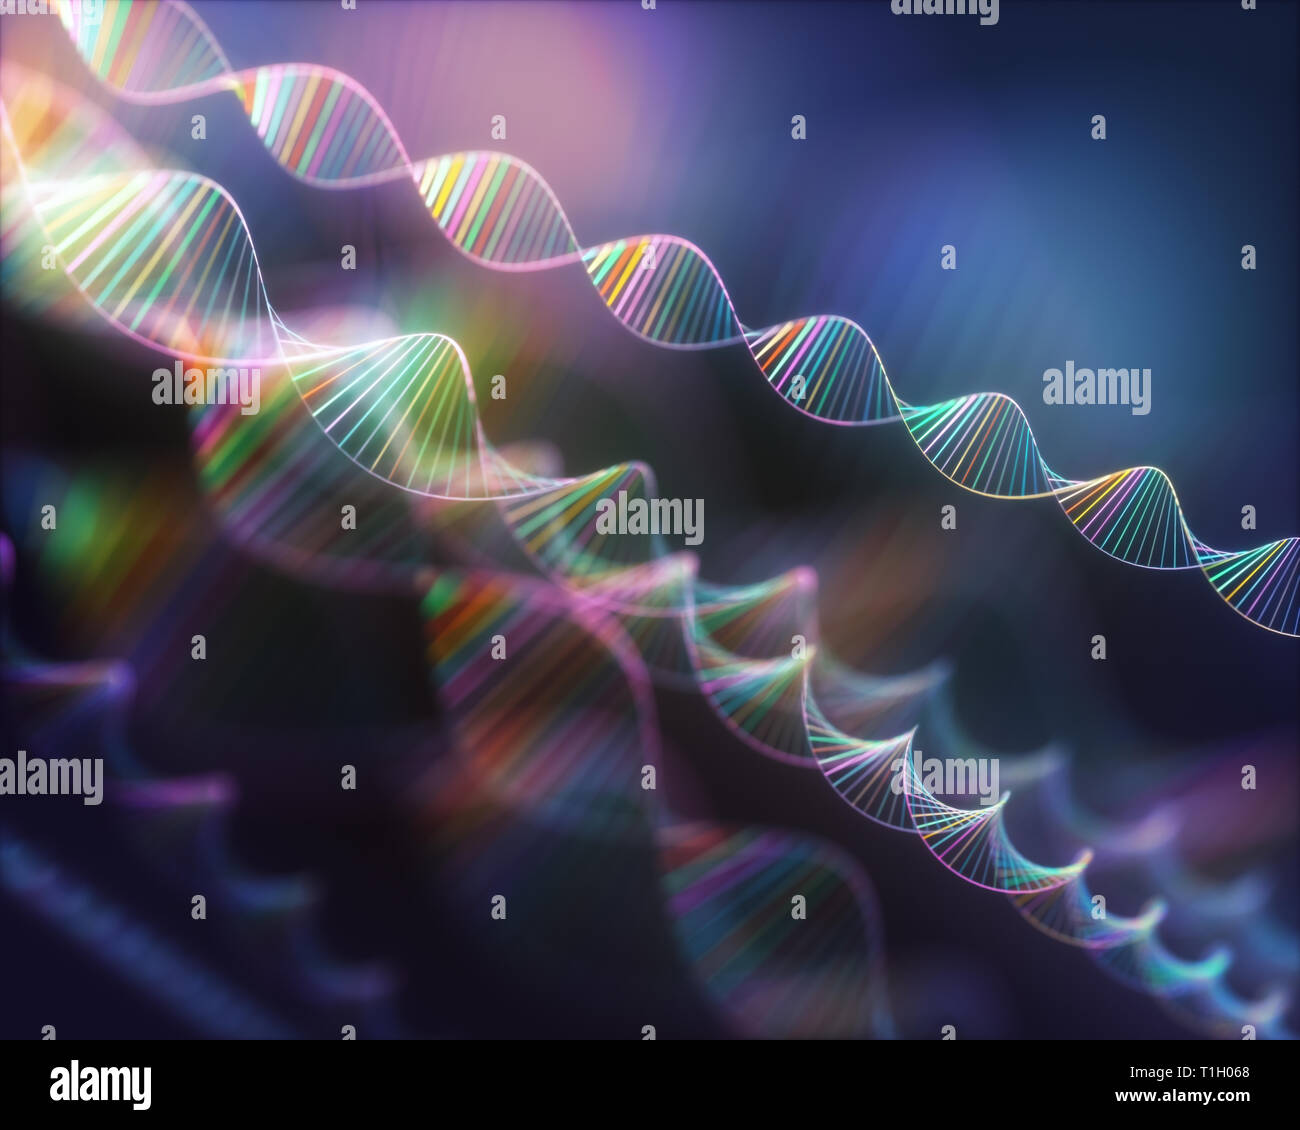 Image of genetic codes DNA. Concept image for use as background. Colored 3D illustration. Stock Photo